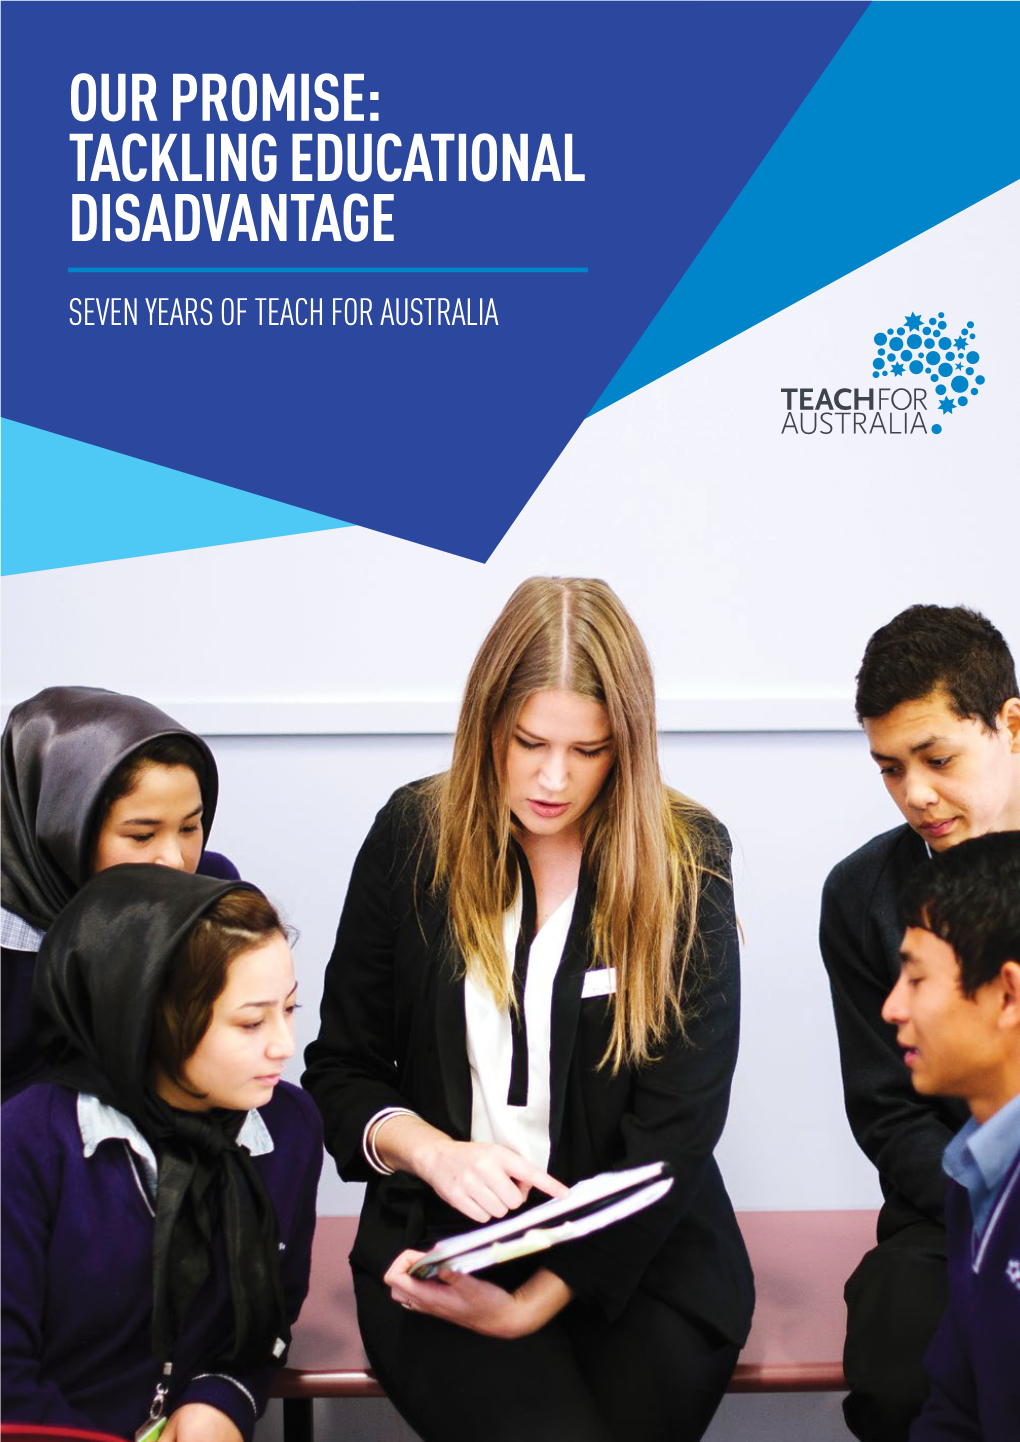 Our Promise: Tackling Educational Disadvantage